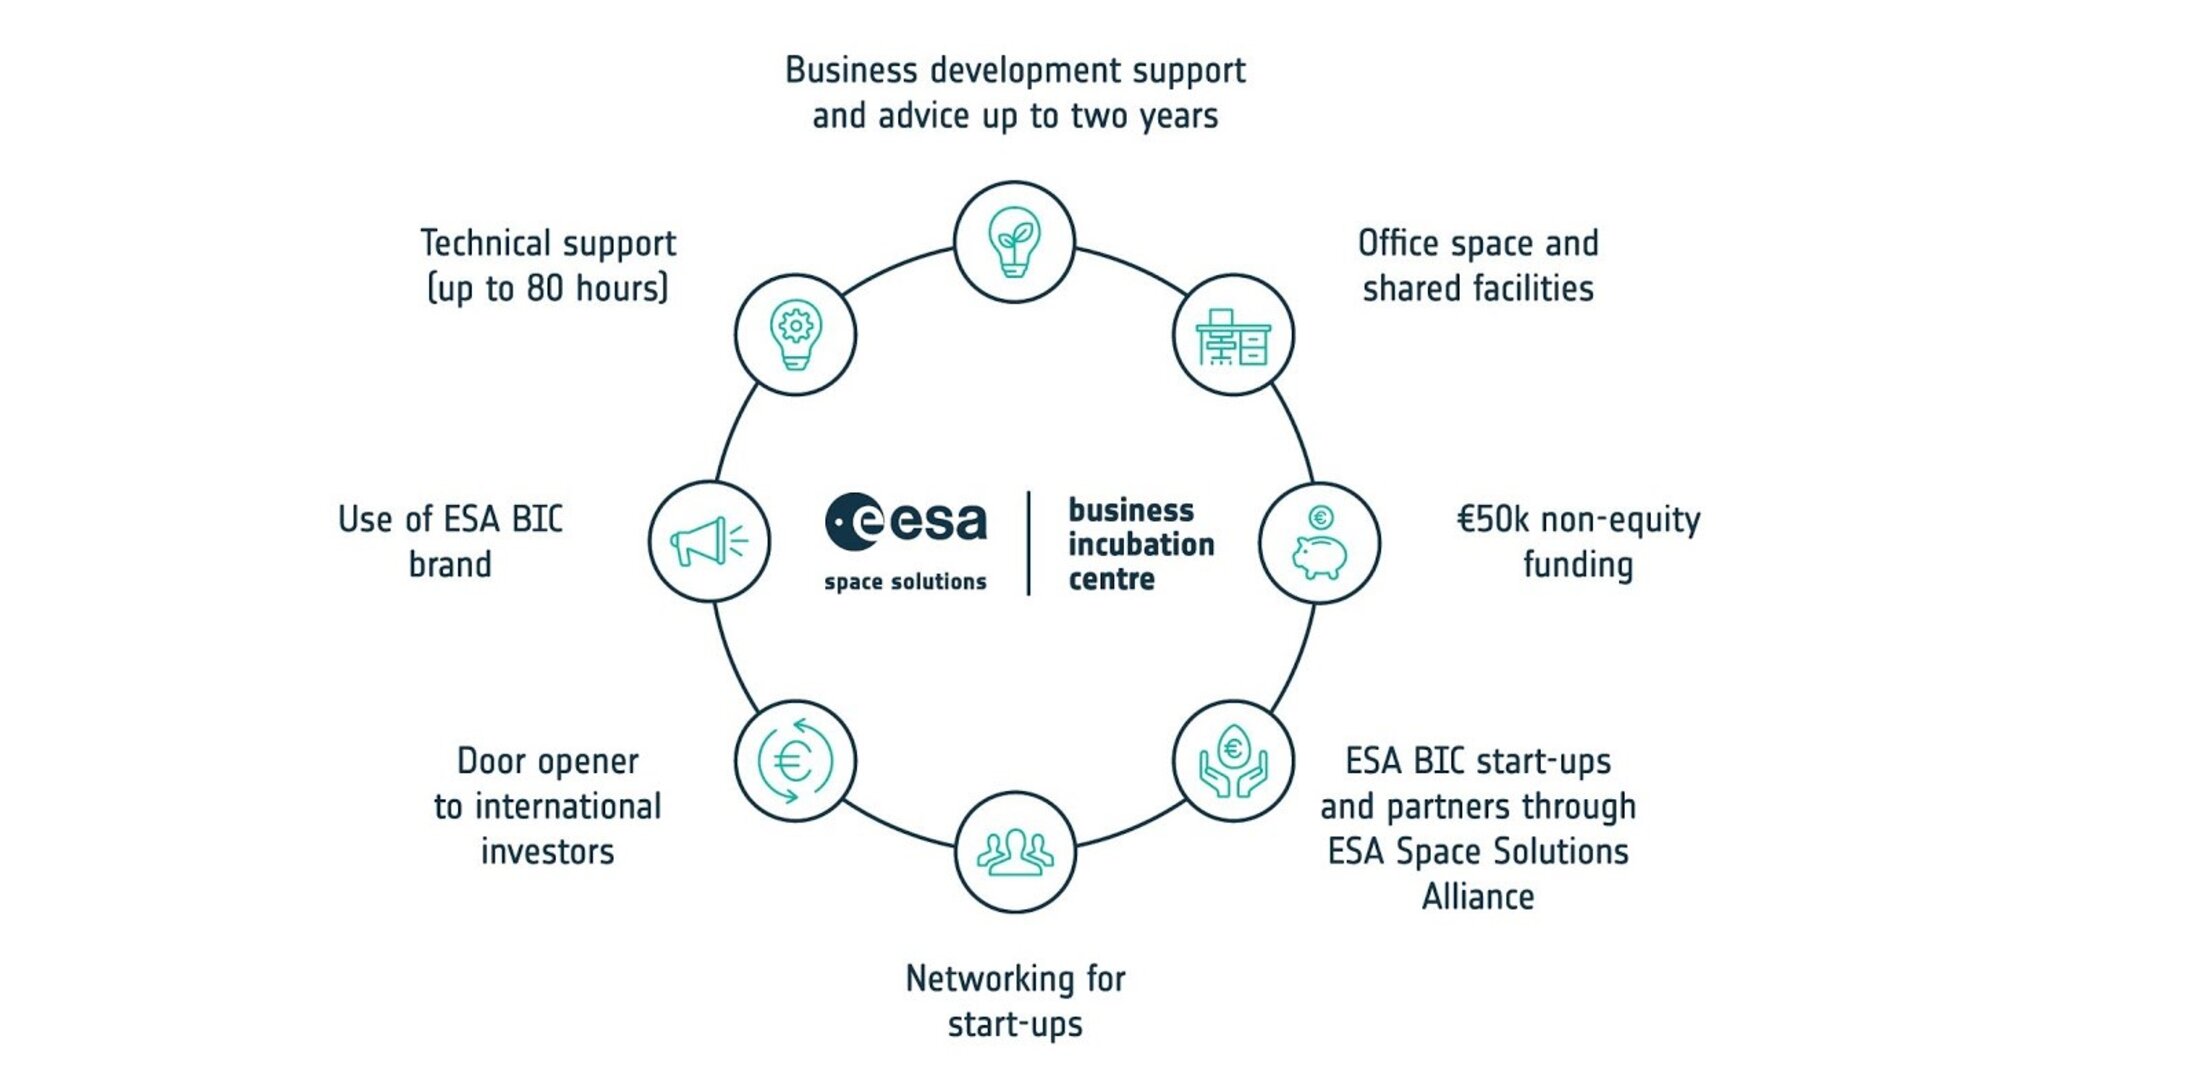 ESA Business incubation centres infographic